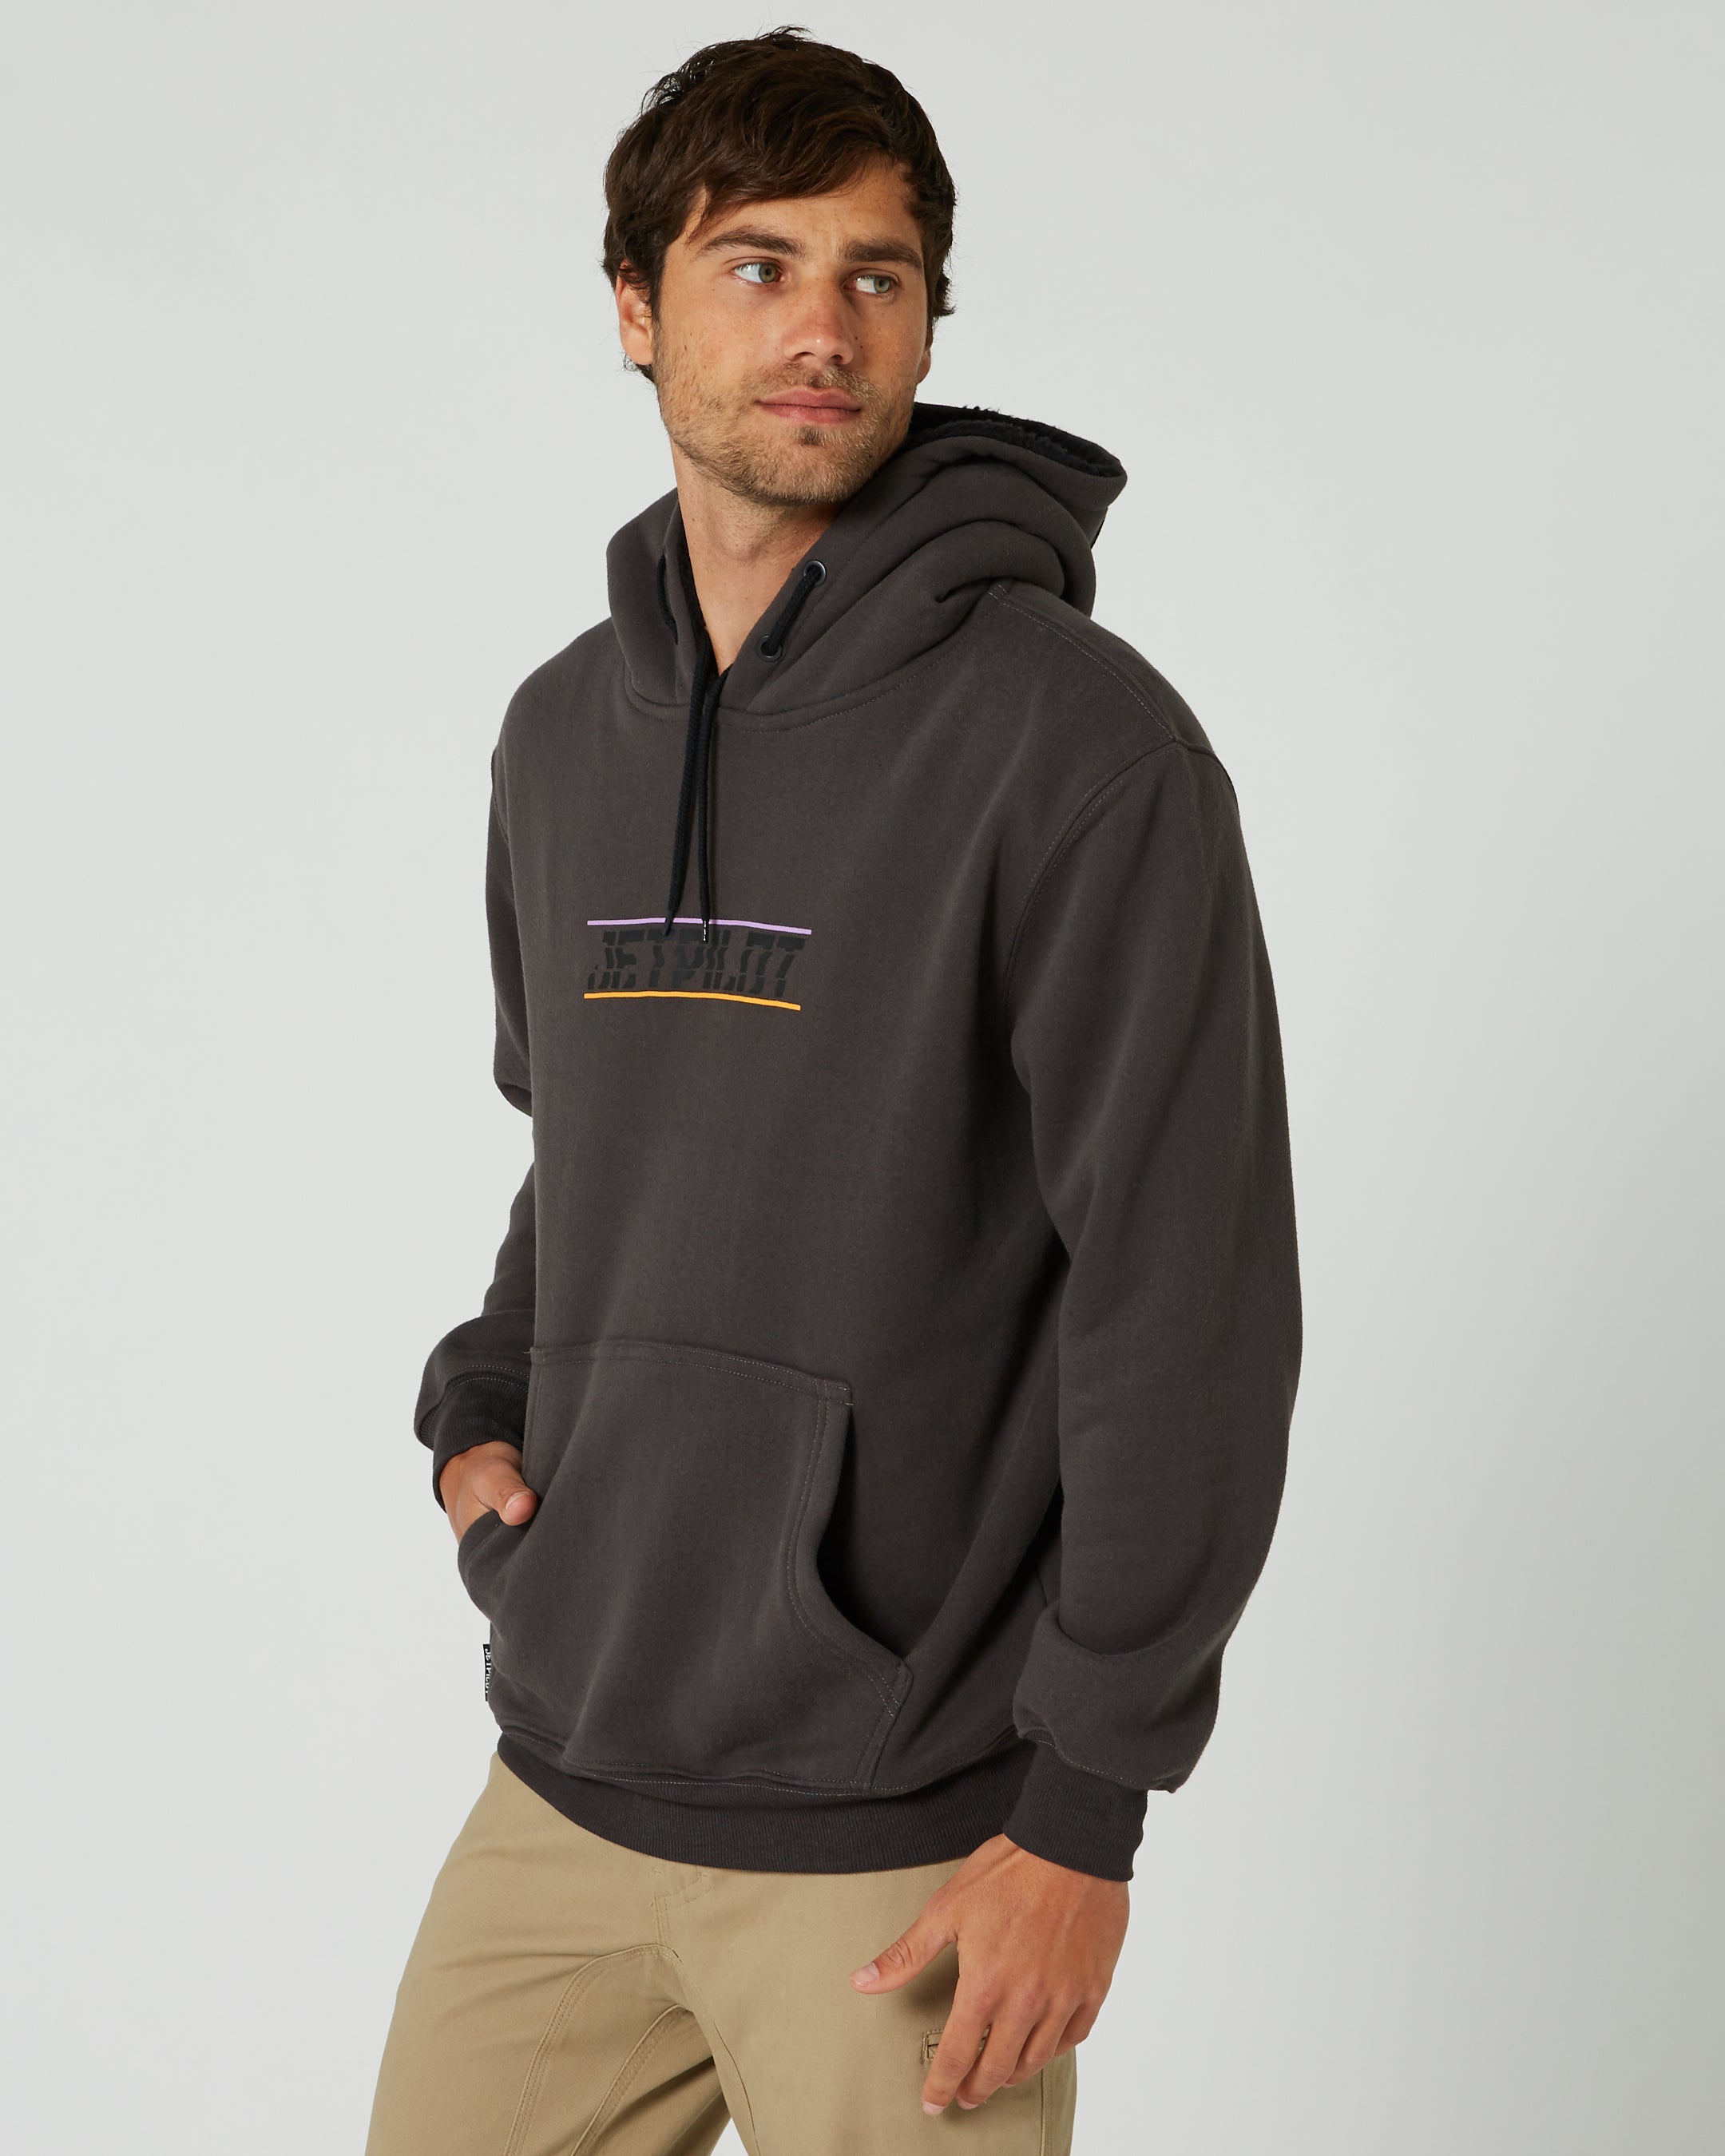 Jetpilot United Mens Pullover Hoodie - Charcoal 2